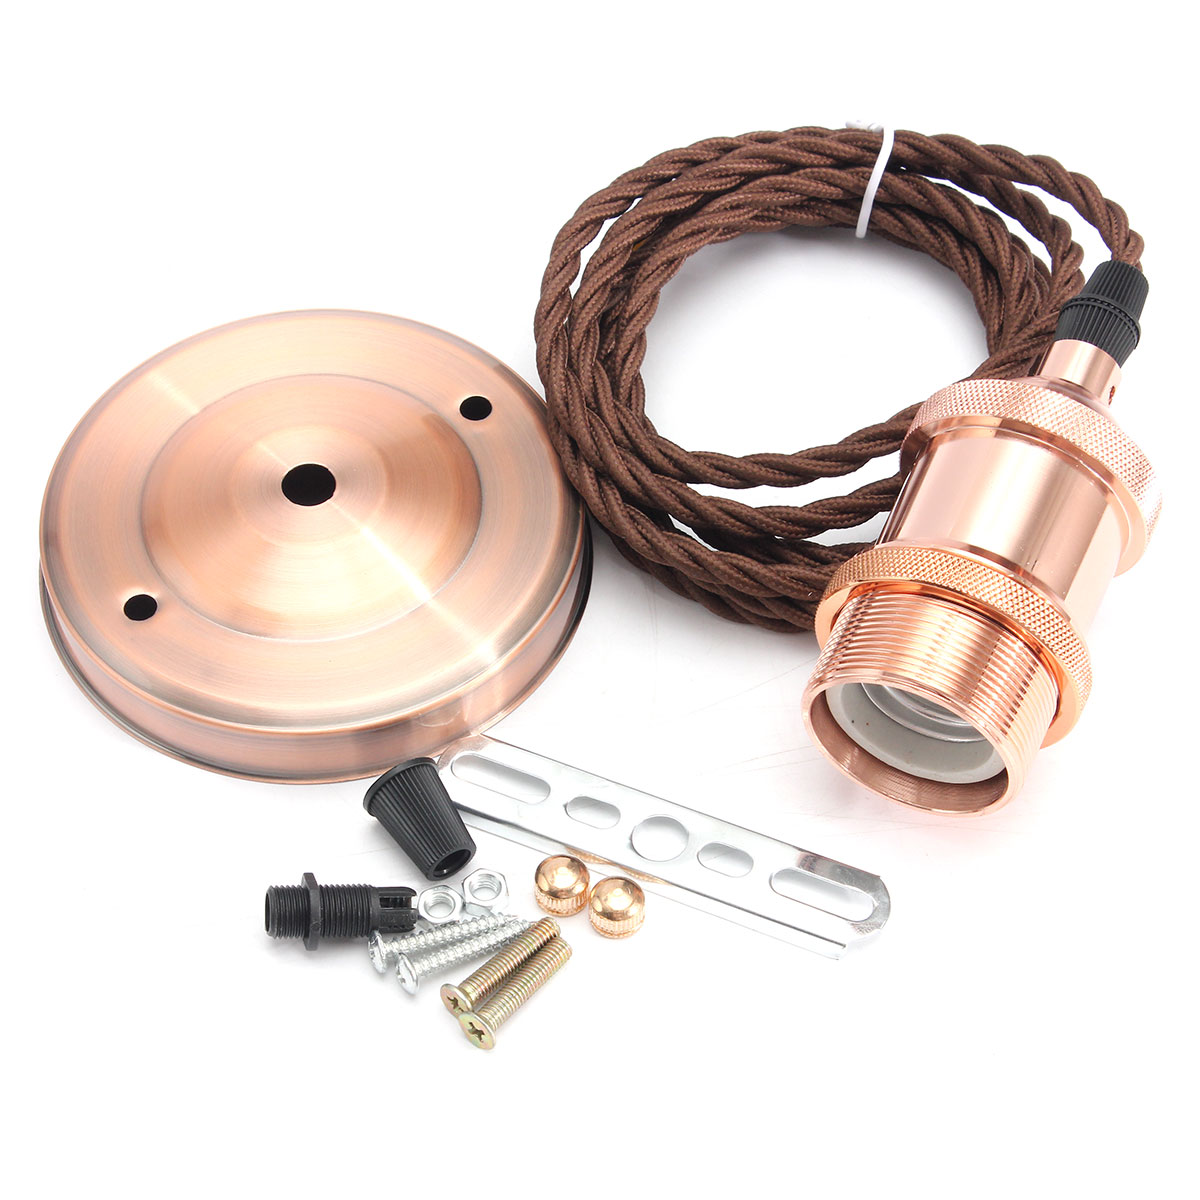 KINGSO-110V-220V-600W-Vintage-Lamp-Holder-Ceiling-Canopy-and-Copper-Socket-with-2M-Wire-1894180-15